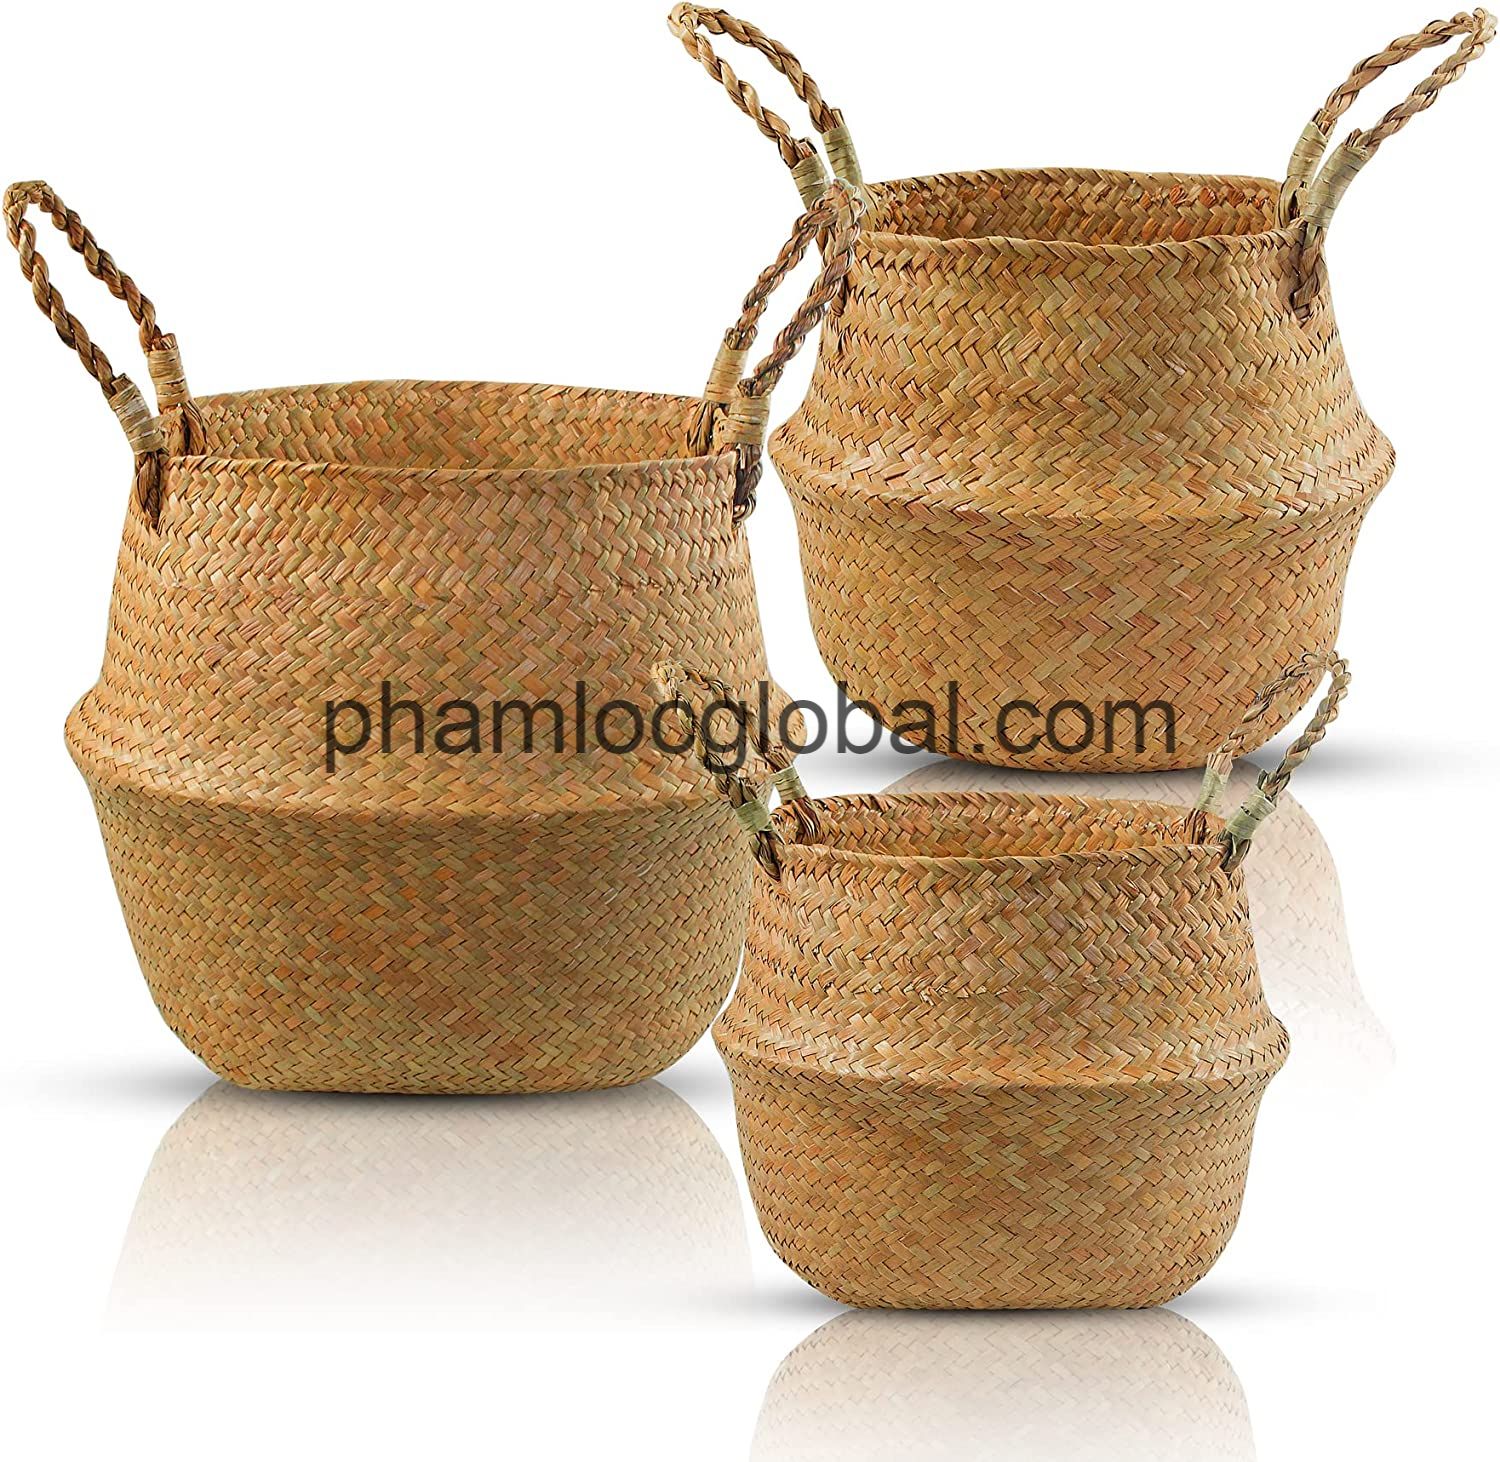 Seagrass hand-woven products